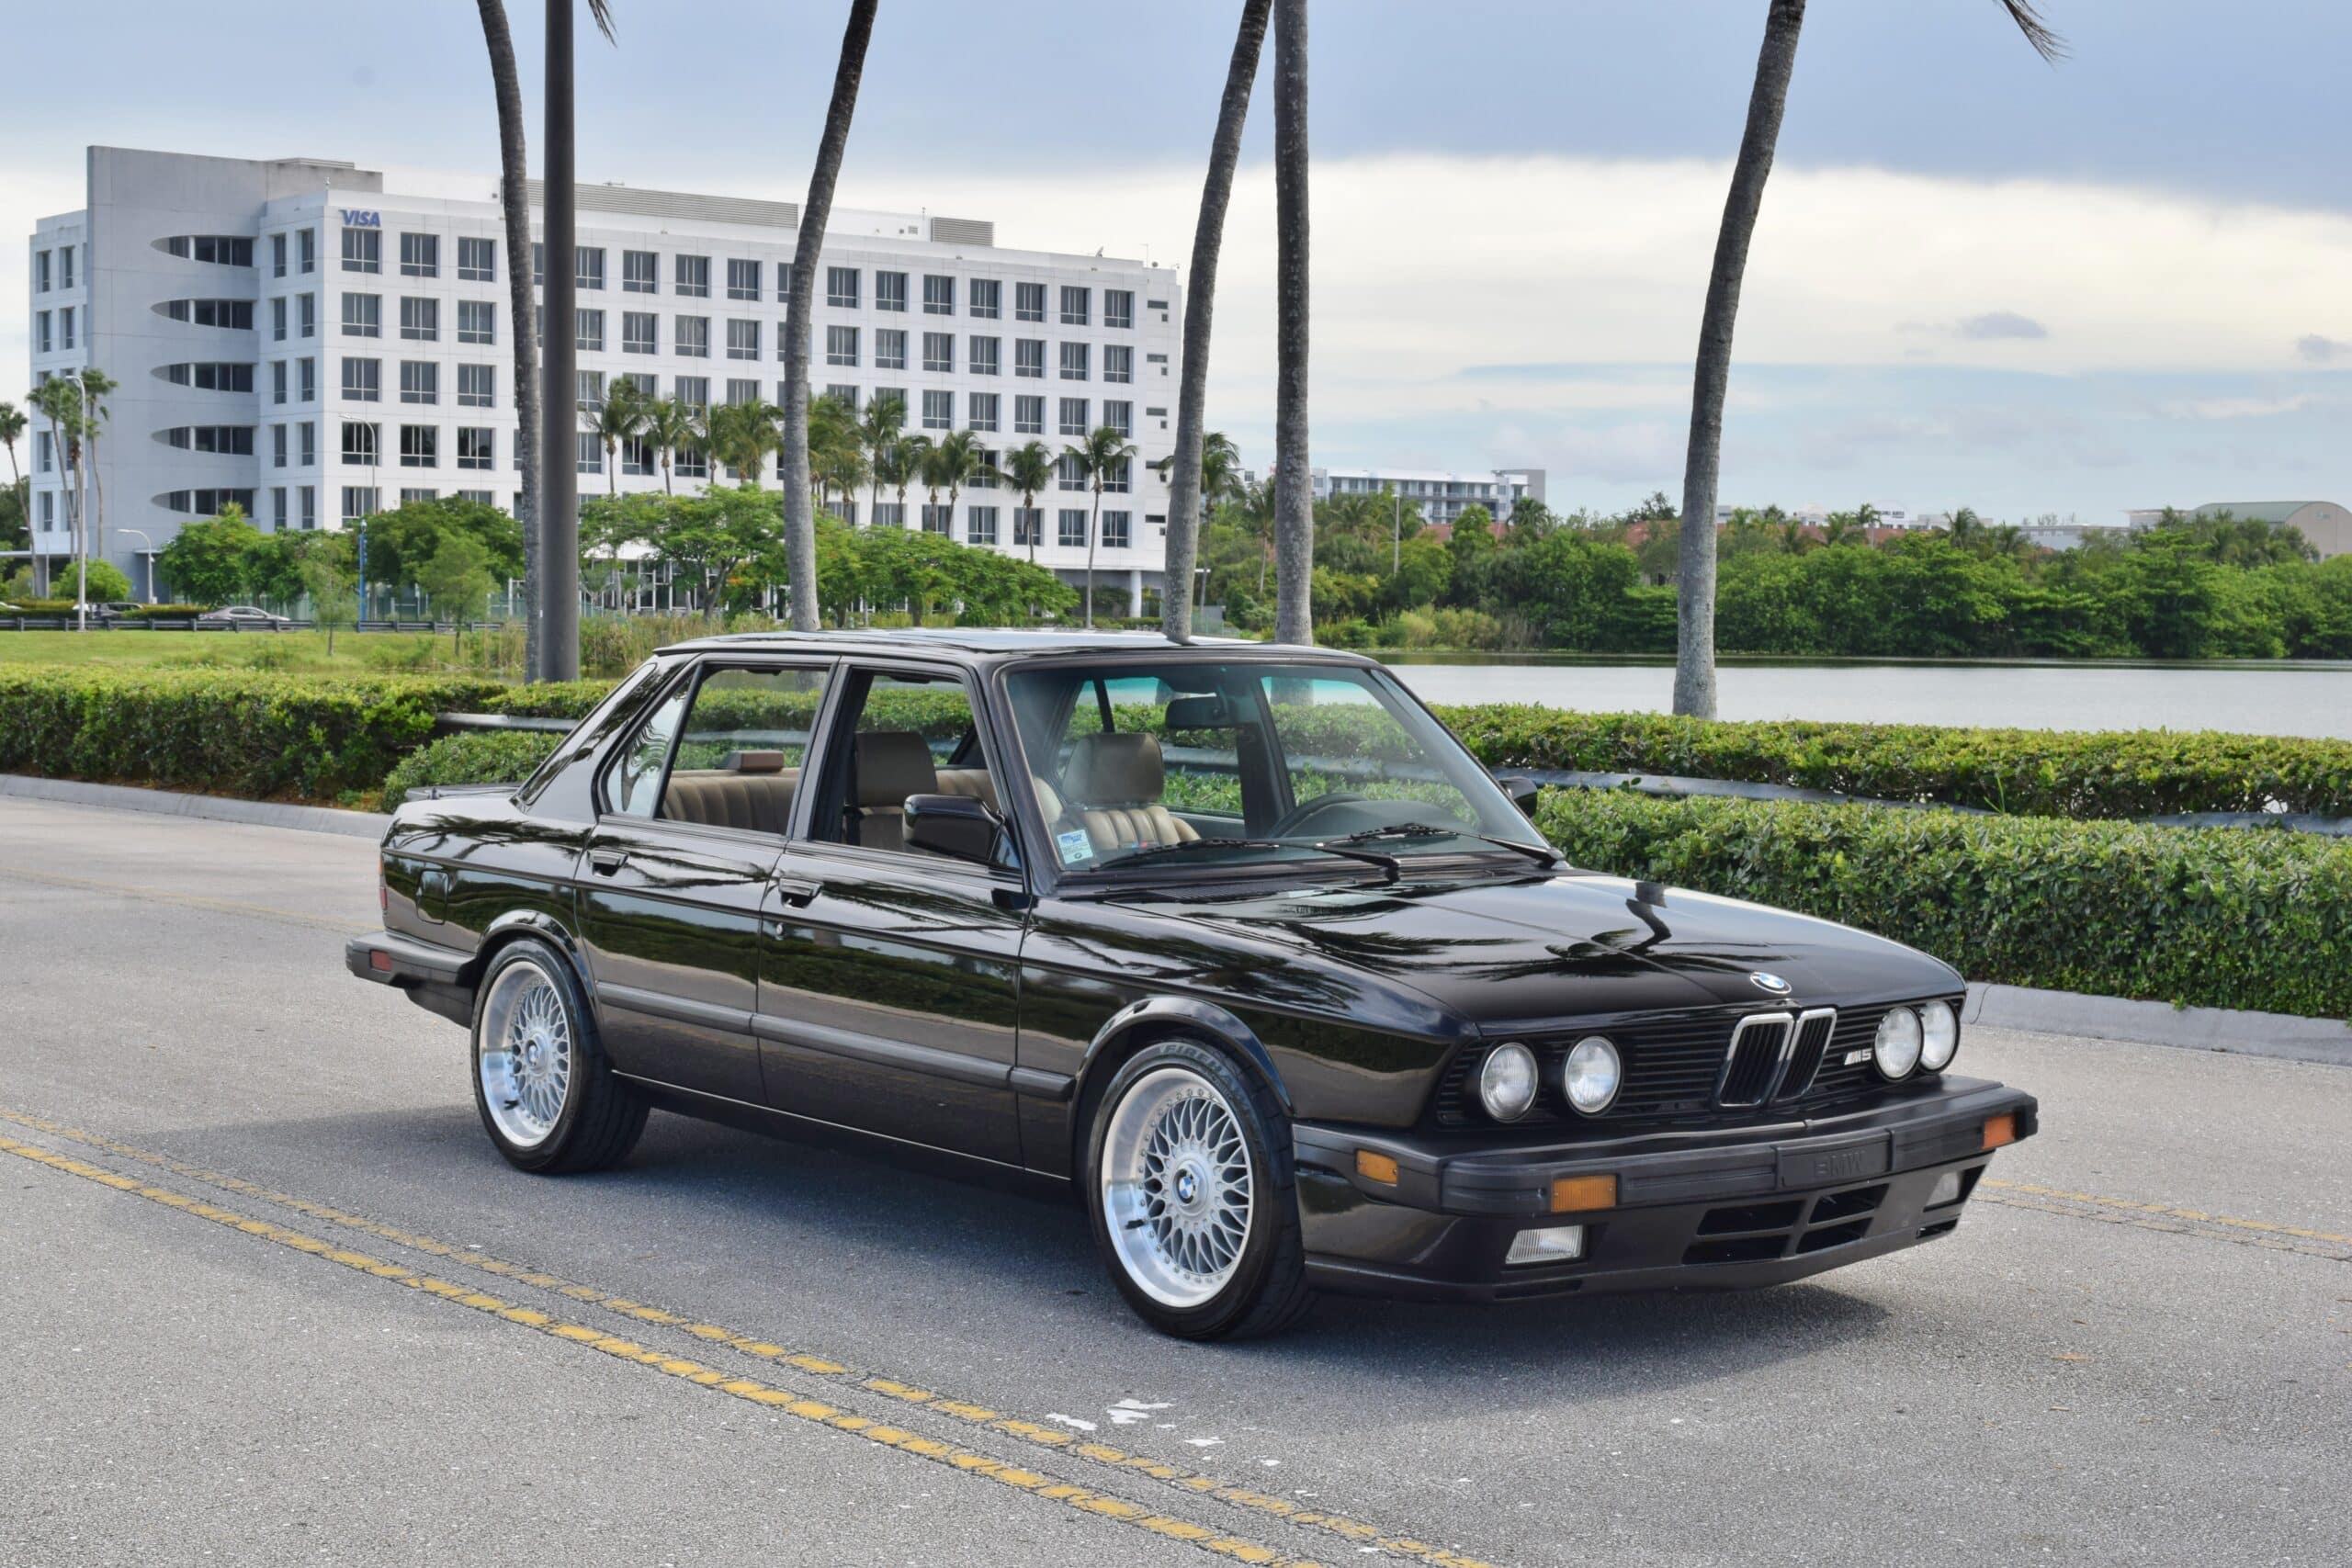 1988 BMW M5 E28 Well Sorted-California Car-Brembo Big Brakes -Full Service History- No Accidents